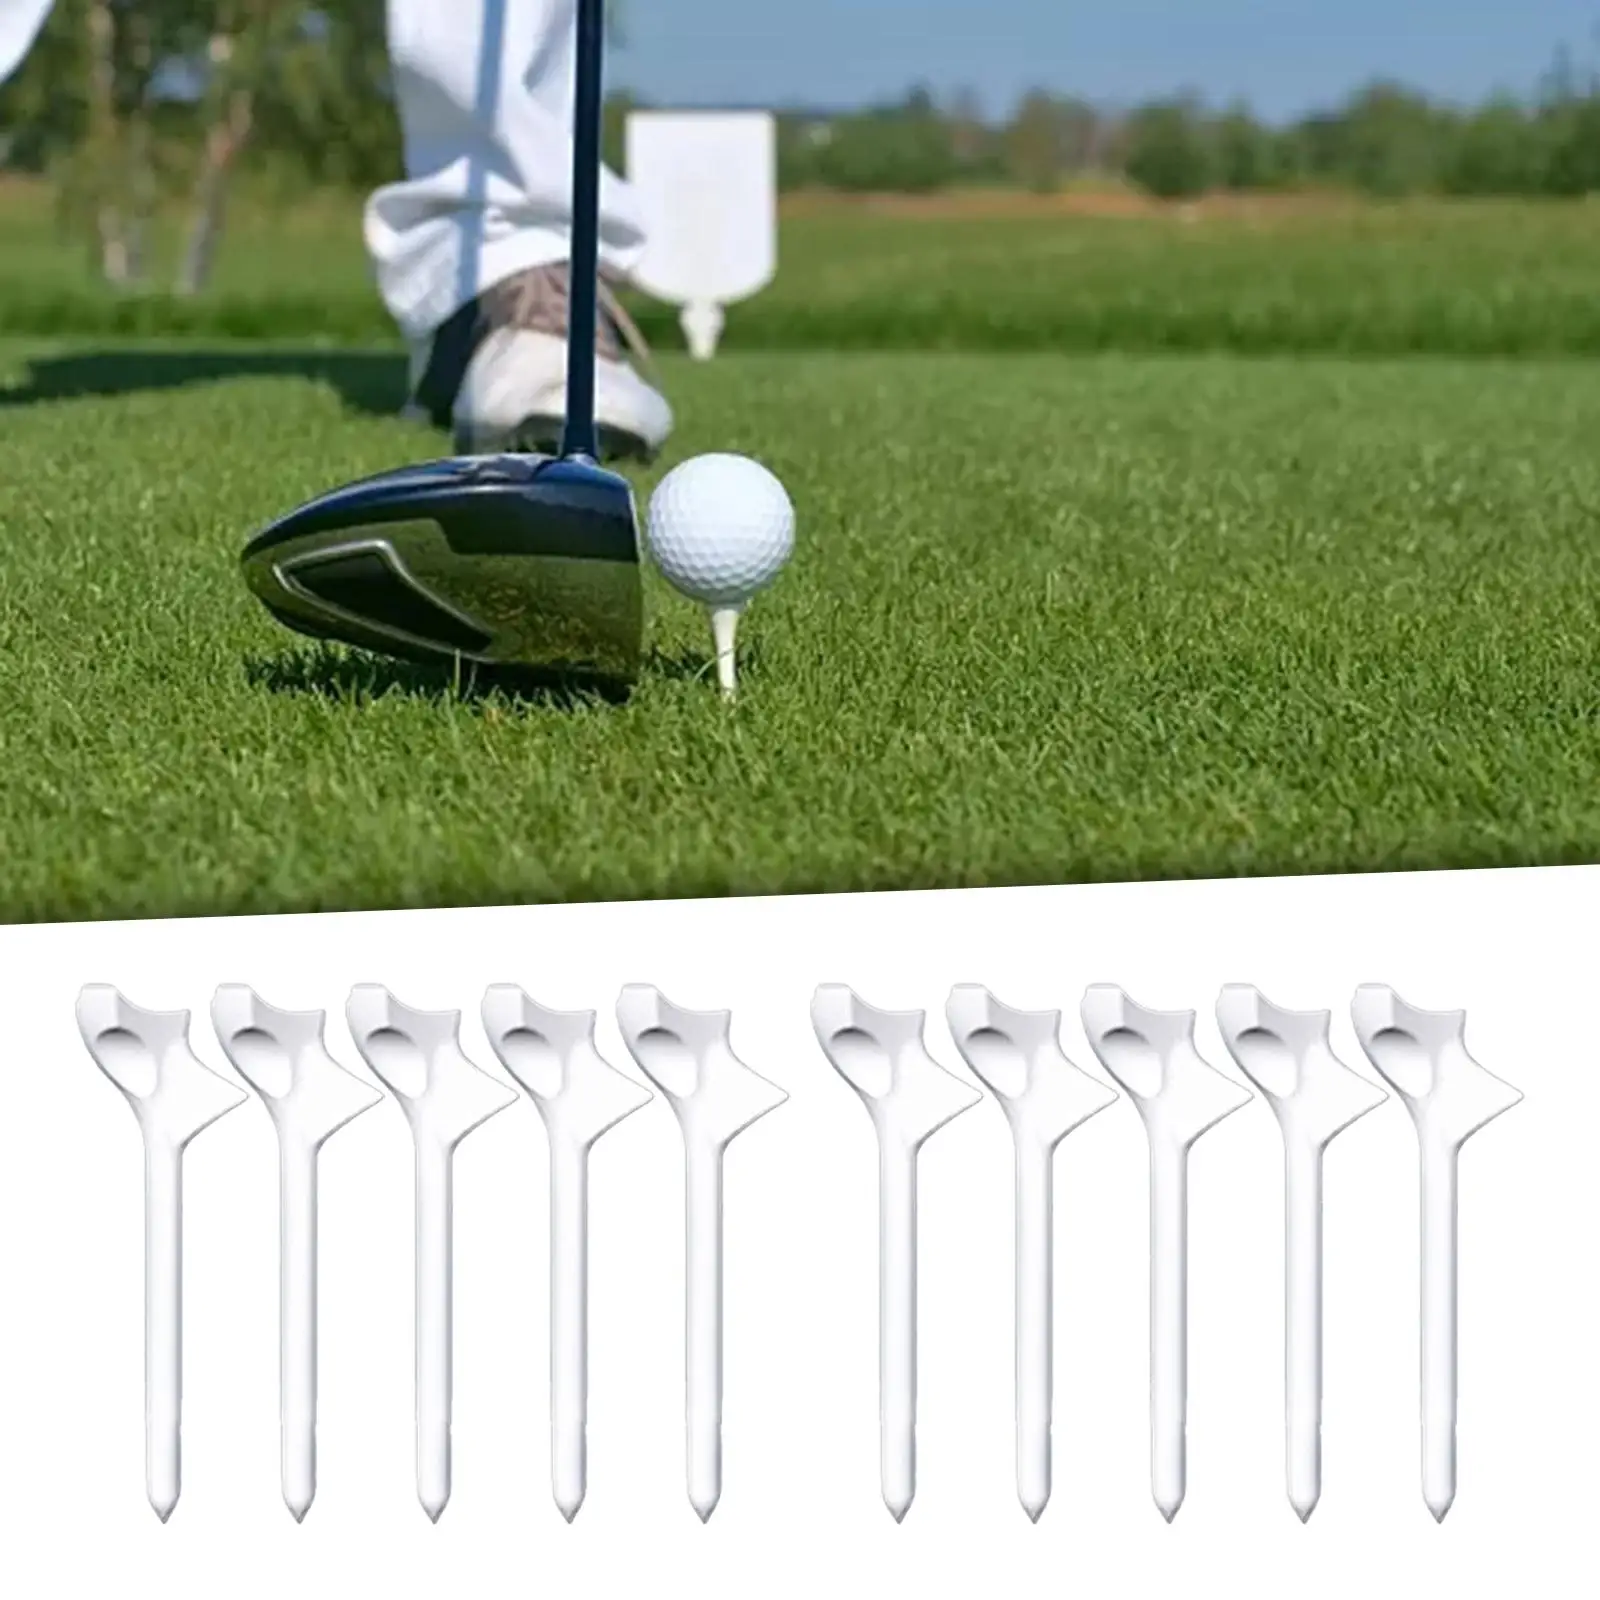 

10 Pieces Golf Tees 10° Golf Swing Trainer Aid Backyard Driving Range Reduces Friction 83mm Golf Ball Holder Golf Accessories